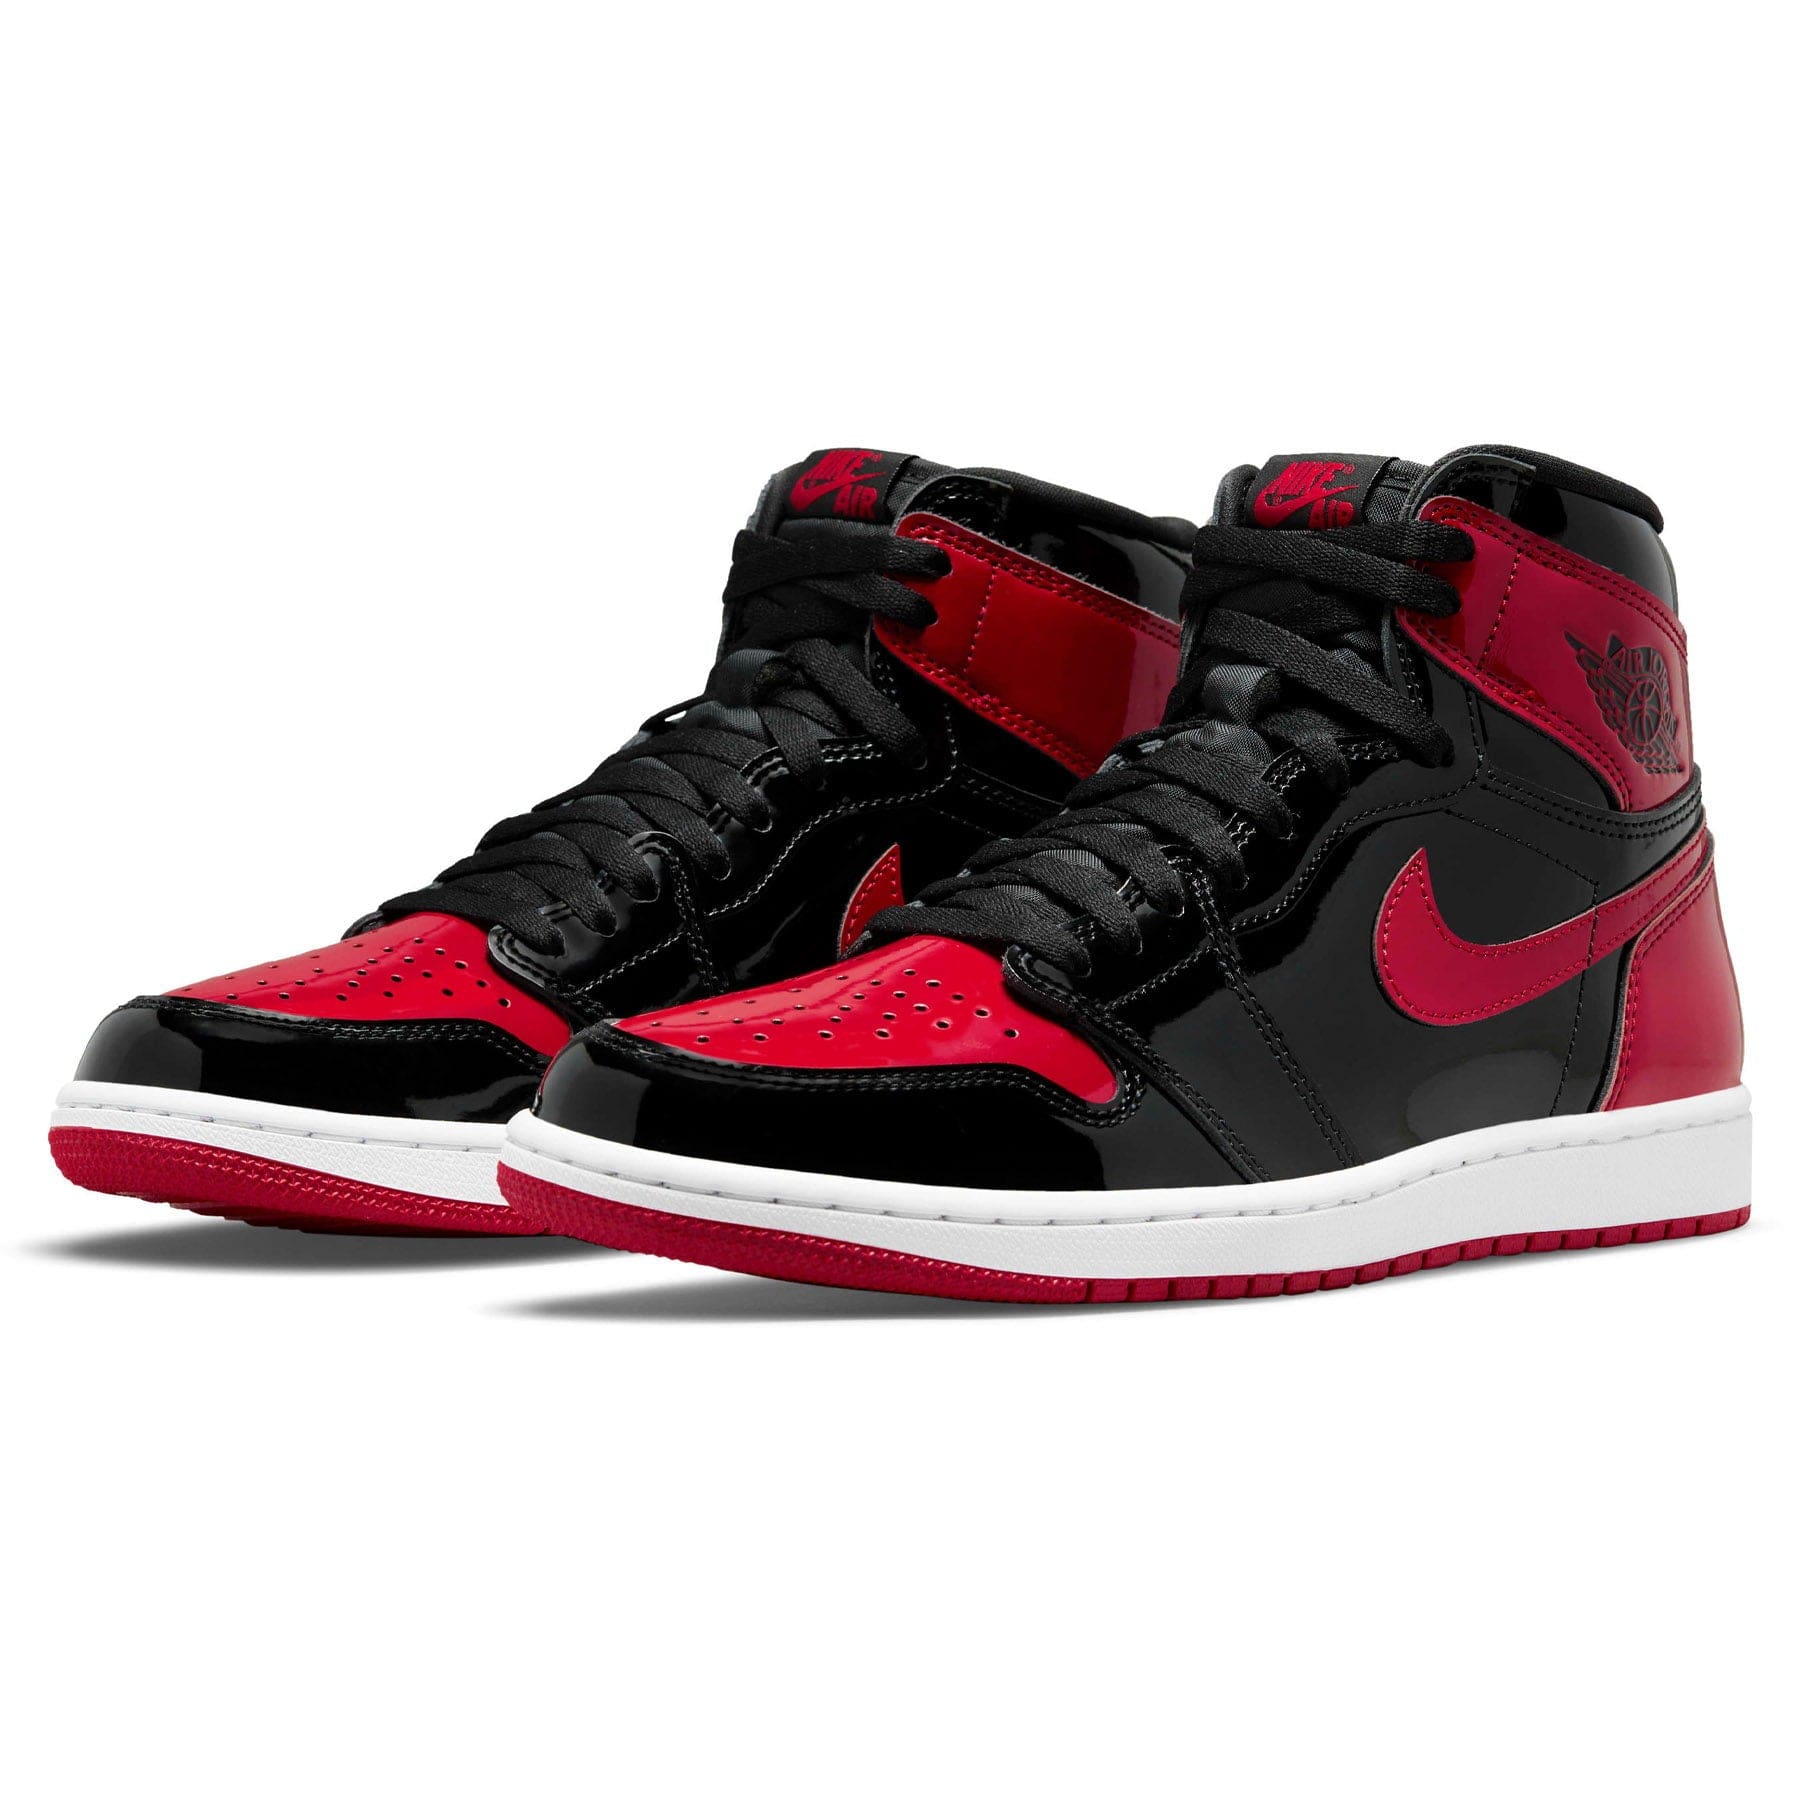 Double Boxed  299.99 Nike Air Jordan 1 High OG 'Patent Bred' Double Boxed